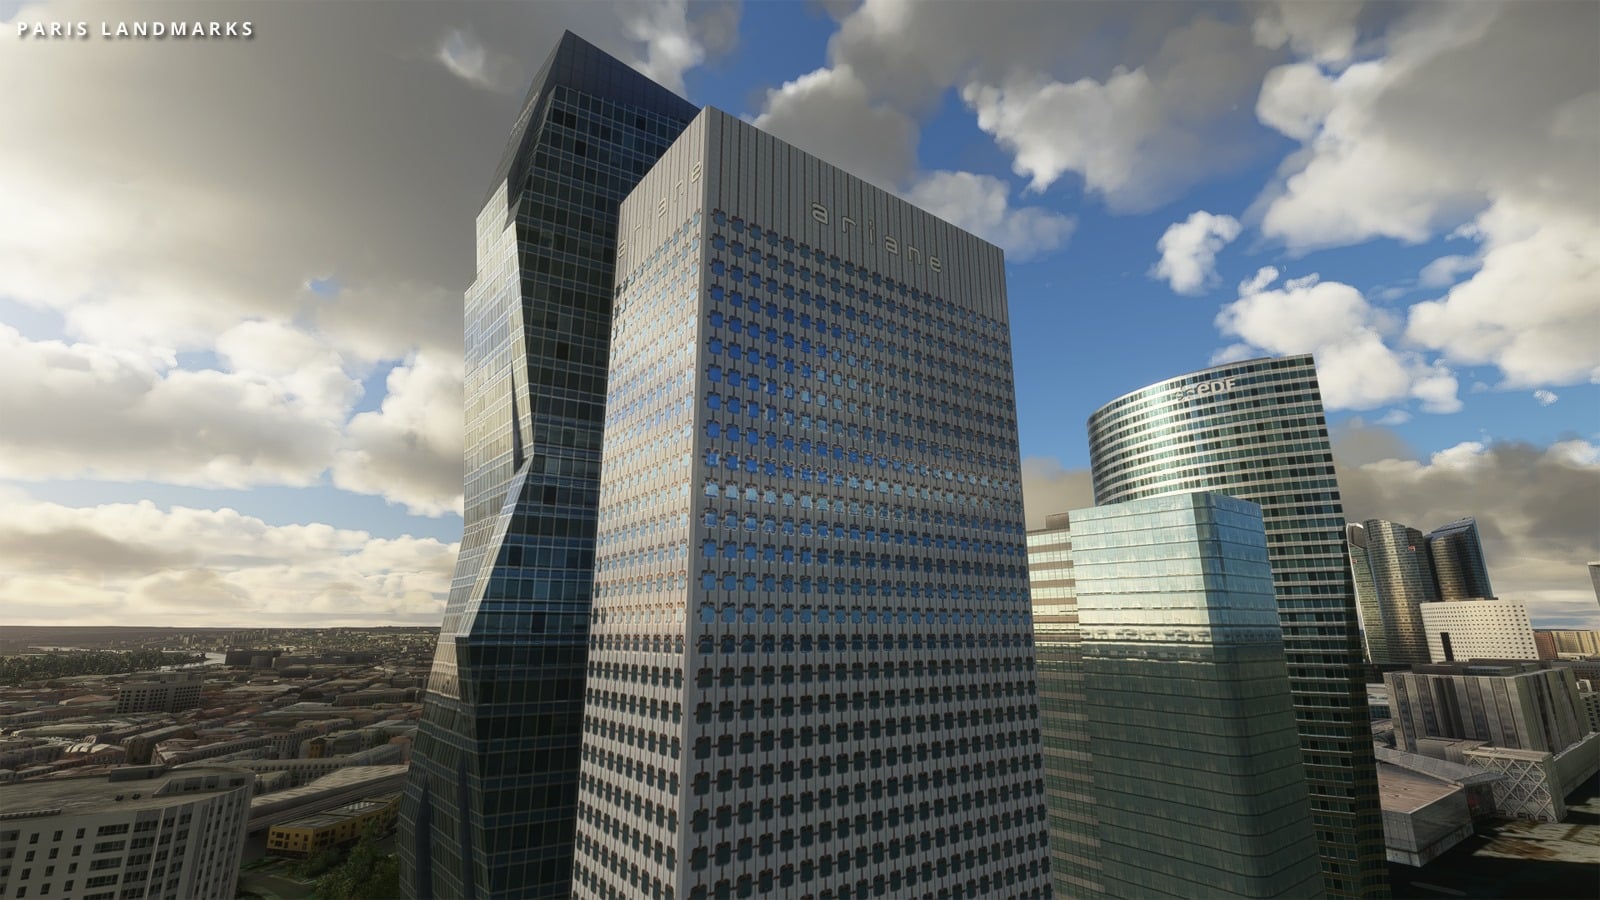 Prealsoft Releases Paris Landmarks for MSFS - PrealSoft